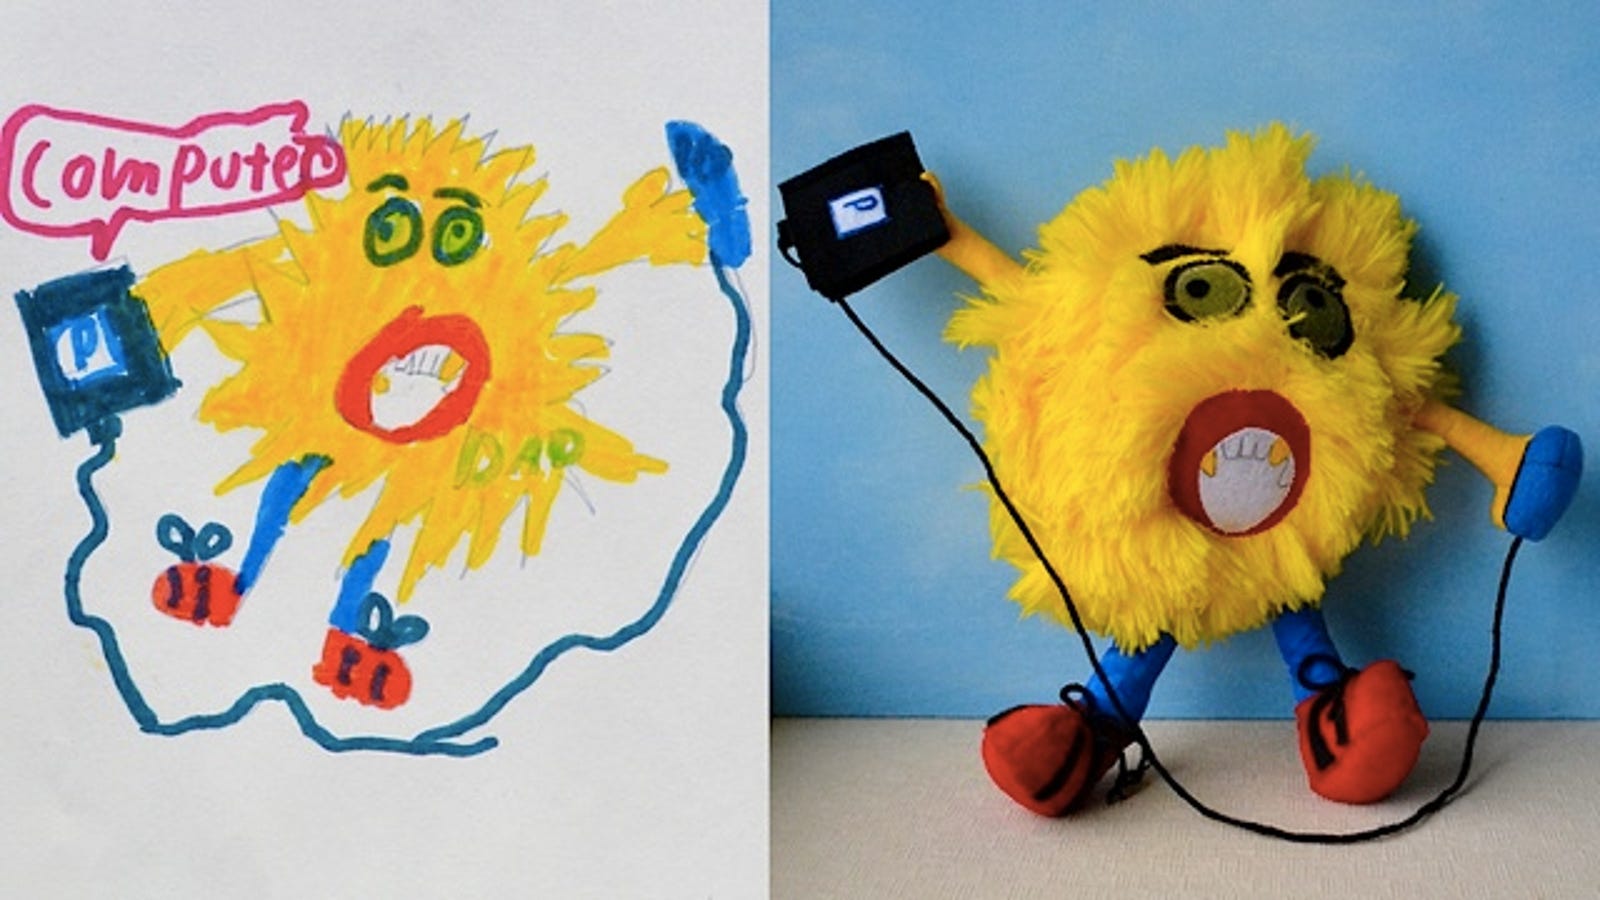 Children's drawings come to life as delightfully weird toys